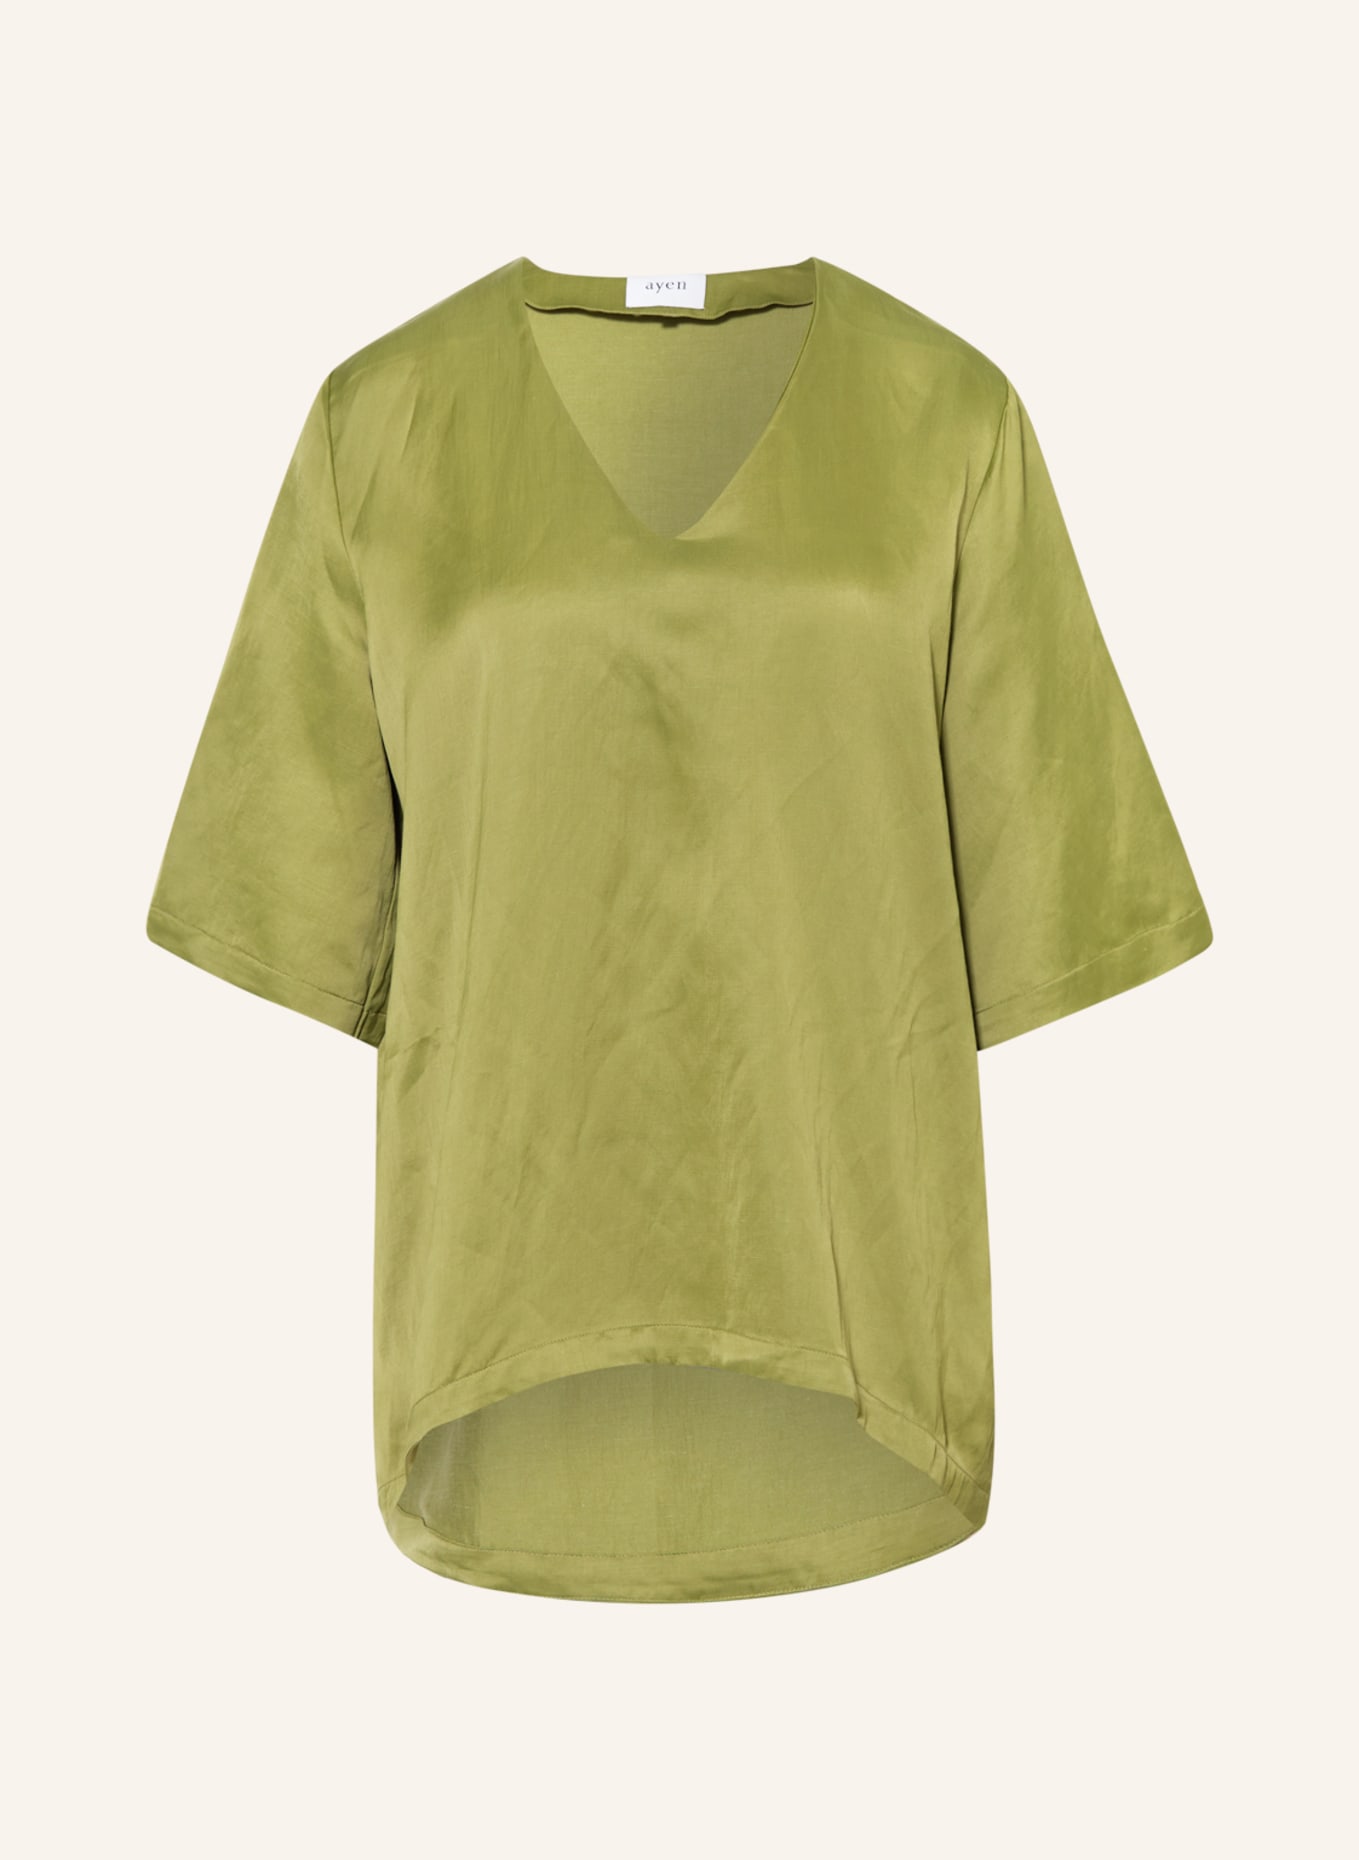 ayen Blouse-style shirt with linen and 3/4 sleeves, Color: GREEN (Image 1)